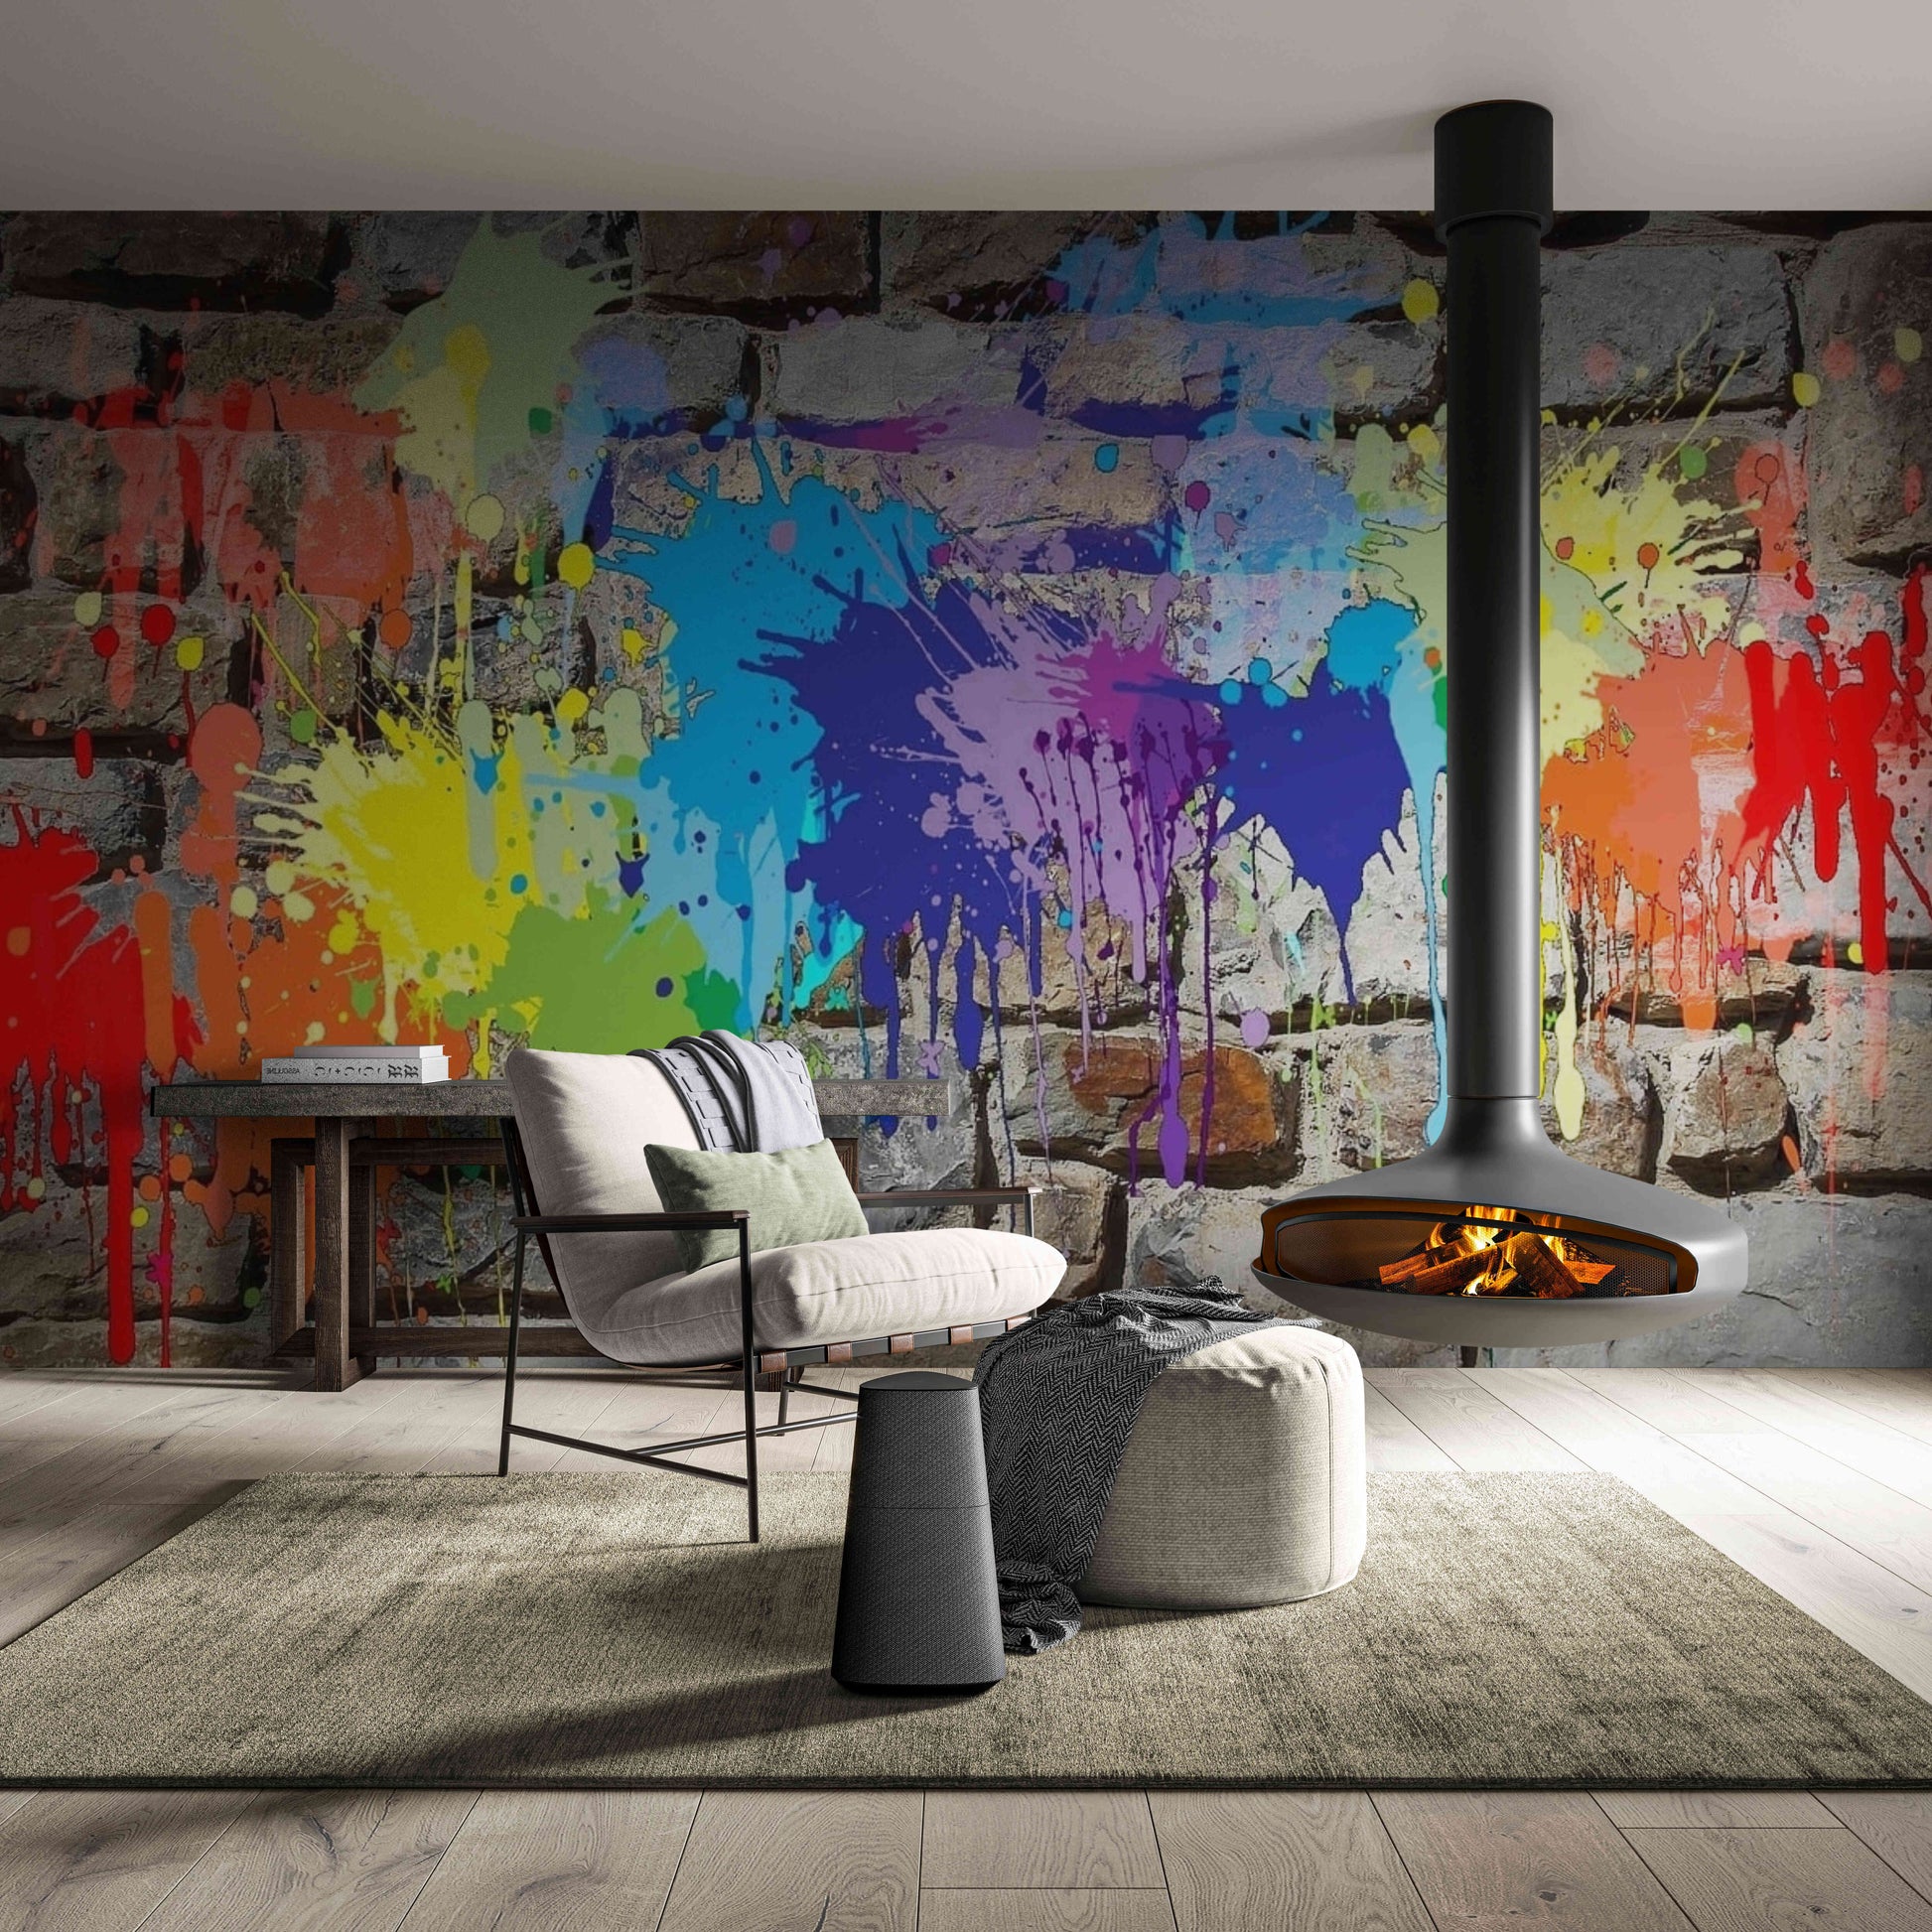 Lifelike street art portrait captured on peel and stick graffiti photo wallpaper, transforming spaces with artistic flair.